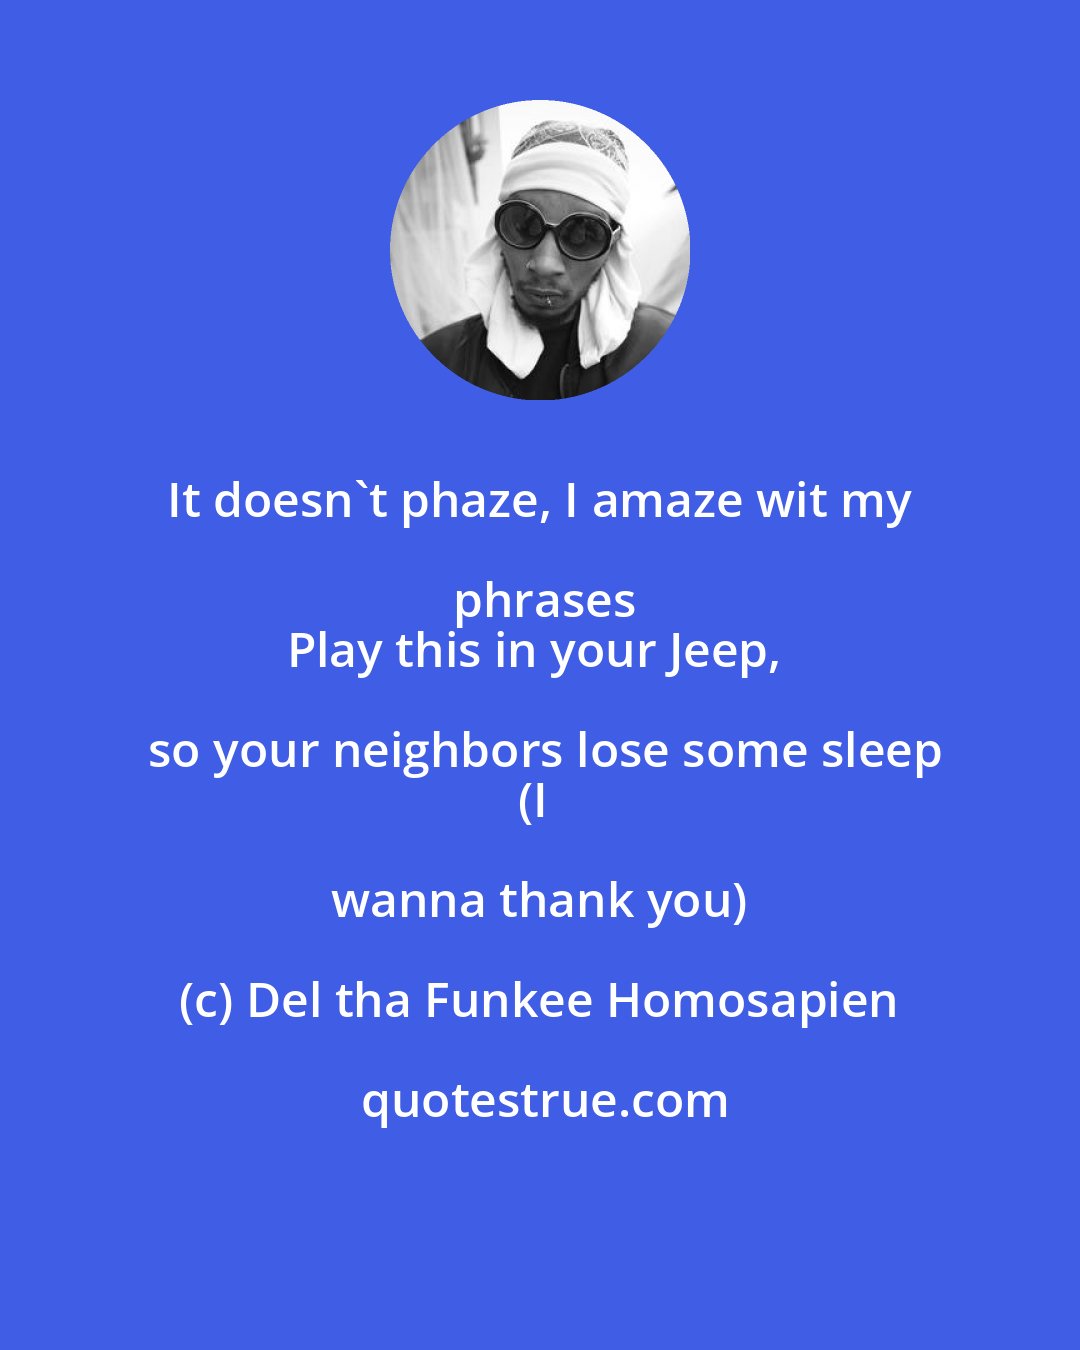 Del tha Funkee Homosapien: It doesn't phaze, I amaze wit my phrases
Play this in your Jeep, so your neighbors lose some sleep
(I wanna thank you)